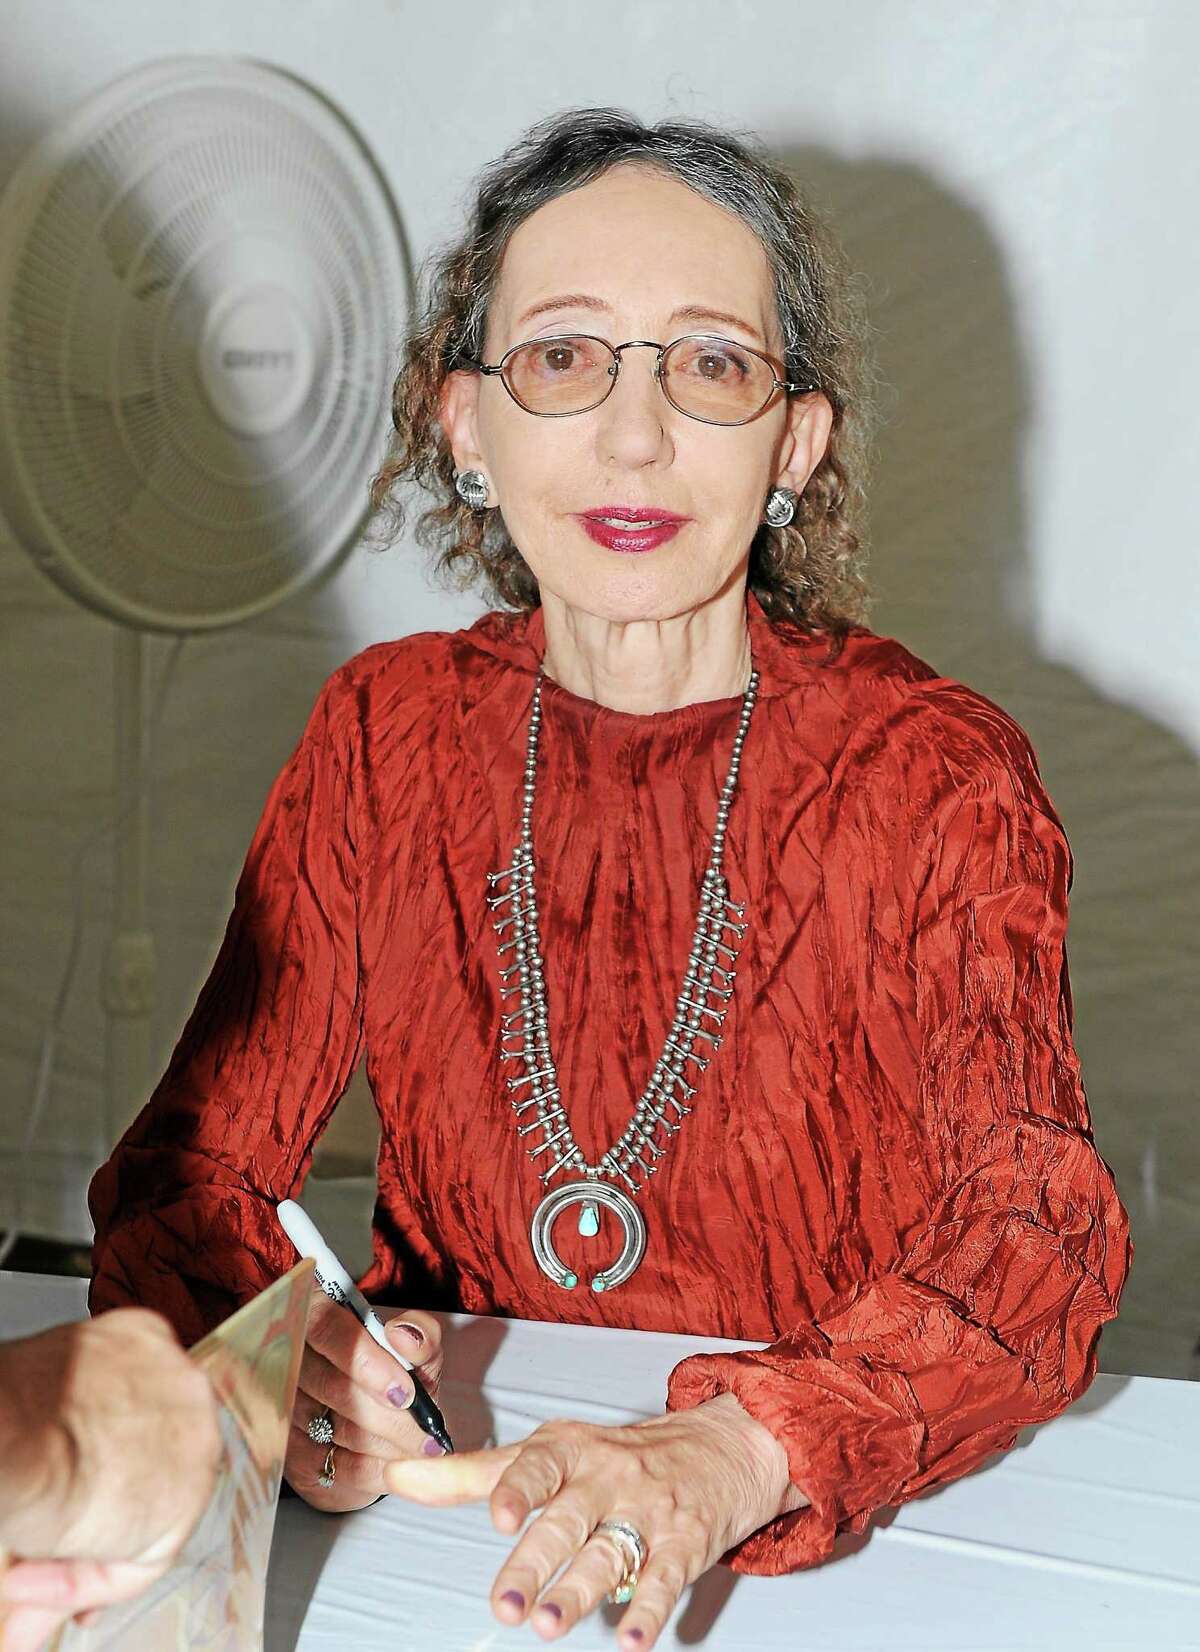 Joyce Carol Oates at the 2013 LA Times Festival of Books at the University of Southern California campus on Saturday April 21, 2013, in Los Angeles. (Photo by Katy Winn/Invision/AP)